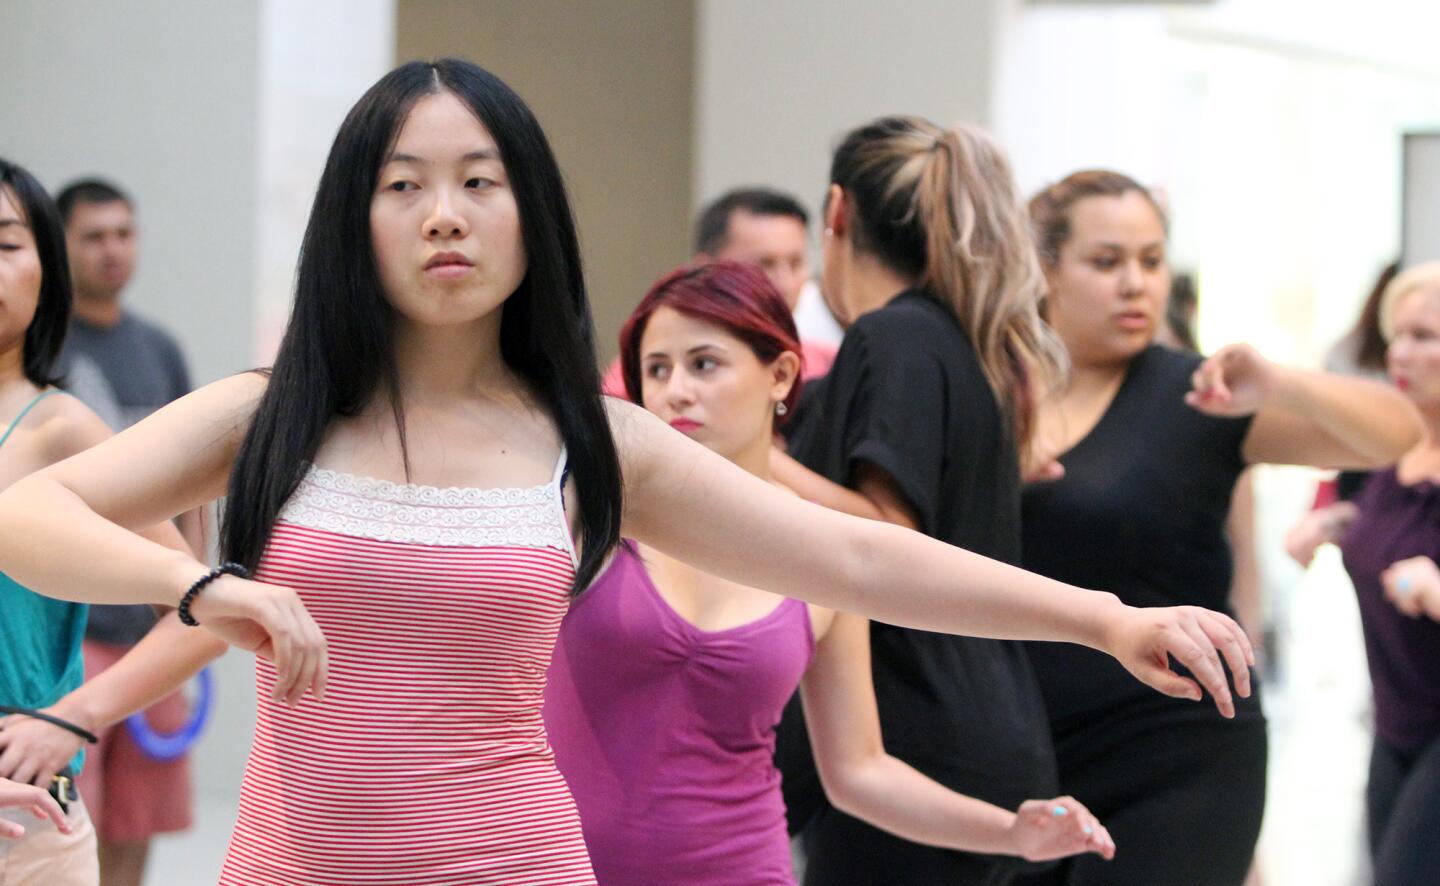 Photo Gallery: Latin dance class at the Galleria